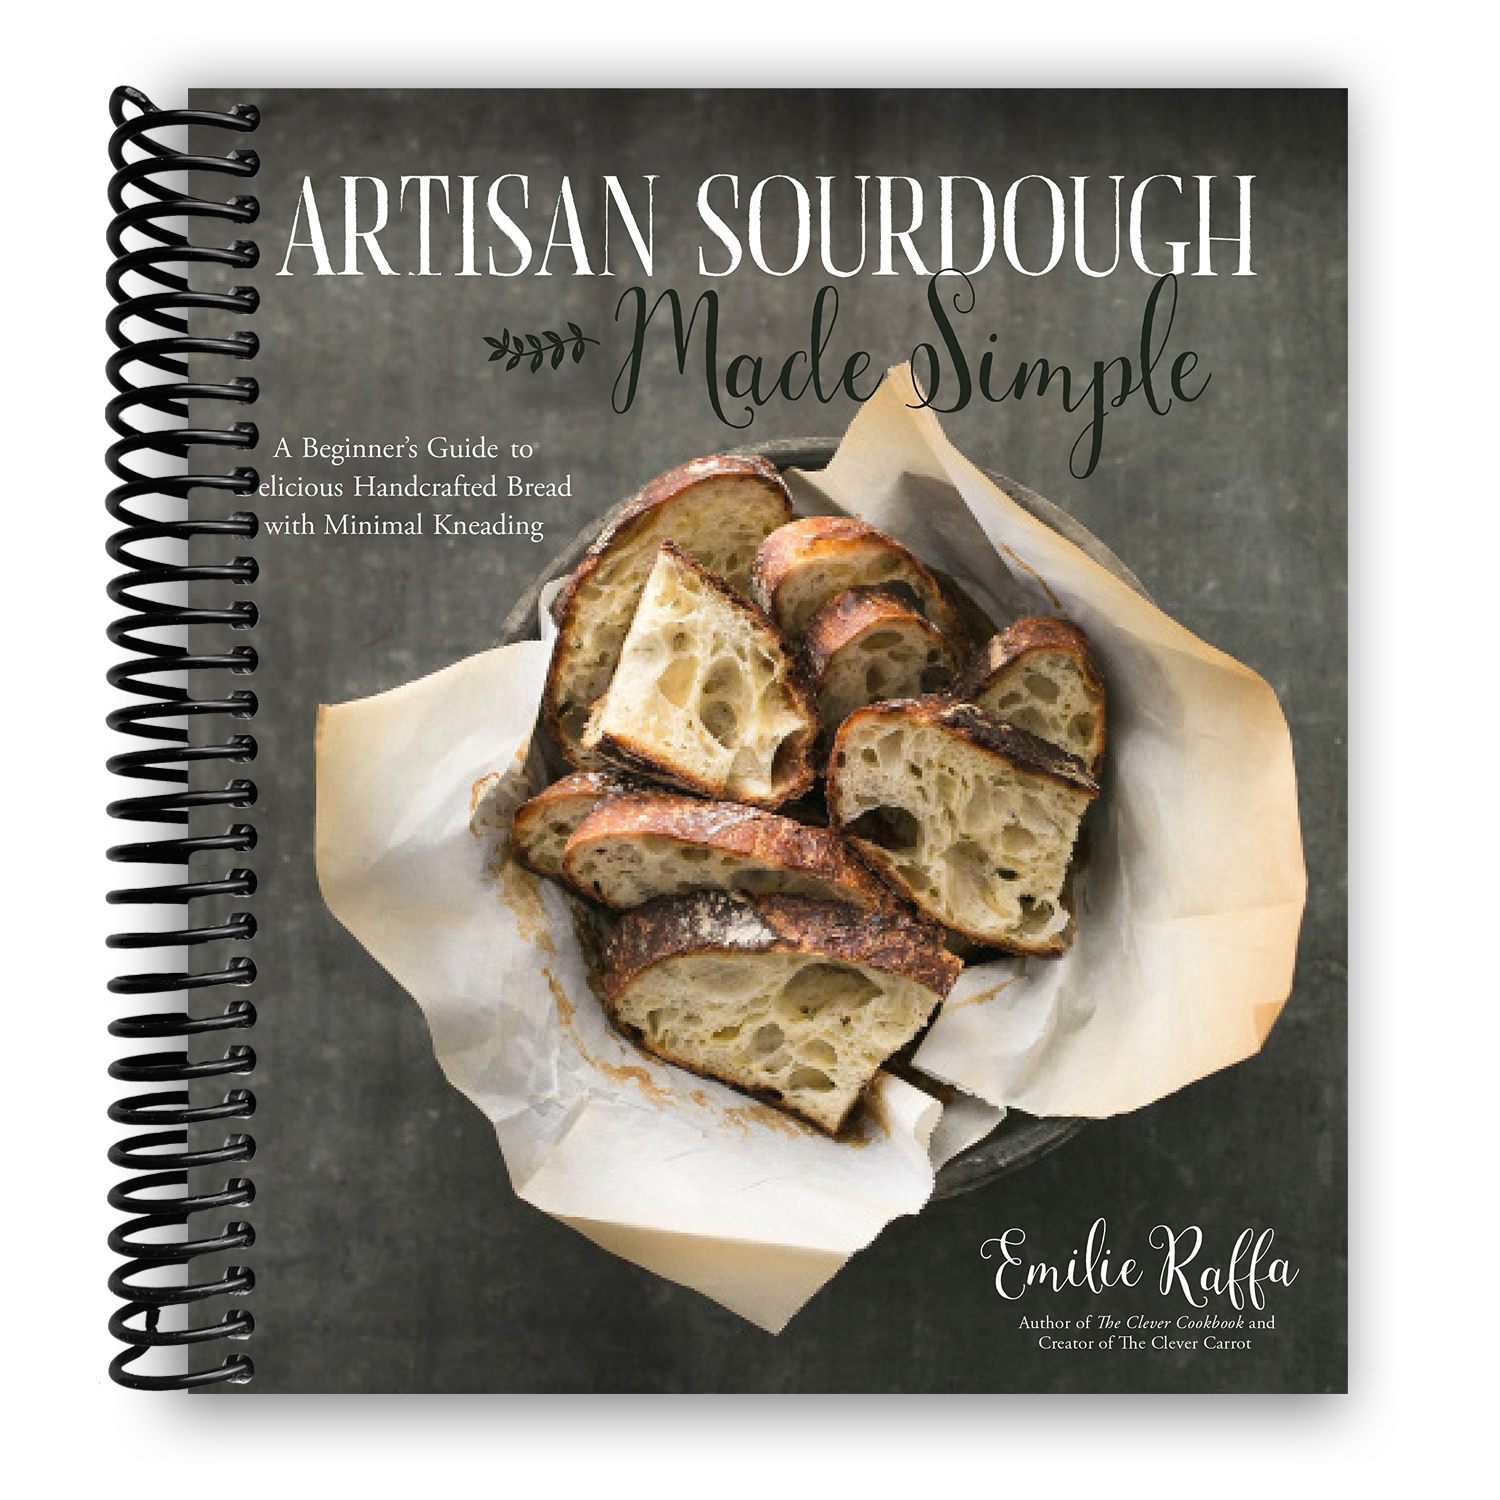 The Homestead Sourdough Cookbook: • Helpful Tips to Create the Best Sourdough Starter • Easy Techniques for Successful Artisan Breads • Over 100 Simple Recipes for Pancakes, Pizza Crust, Brownies, and More [Book]